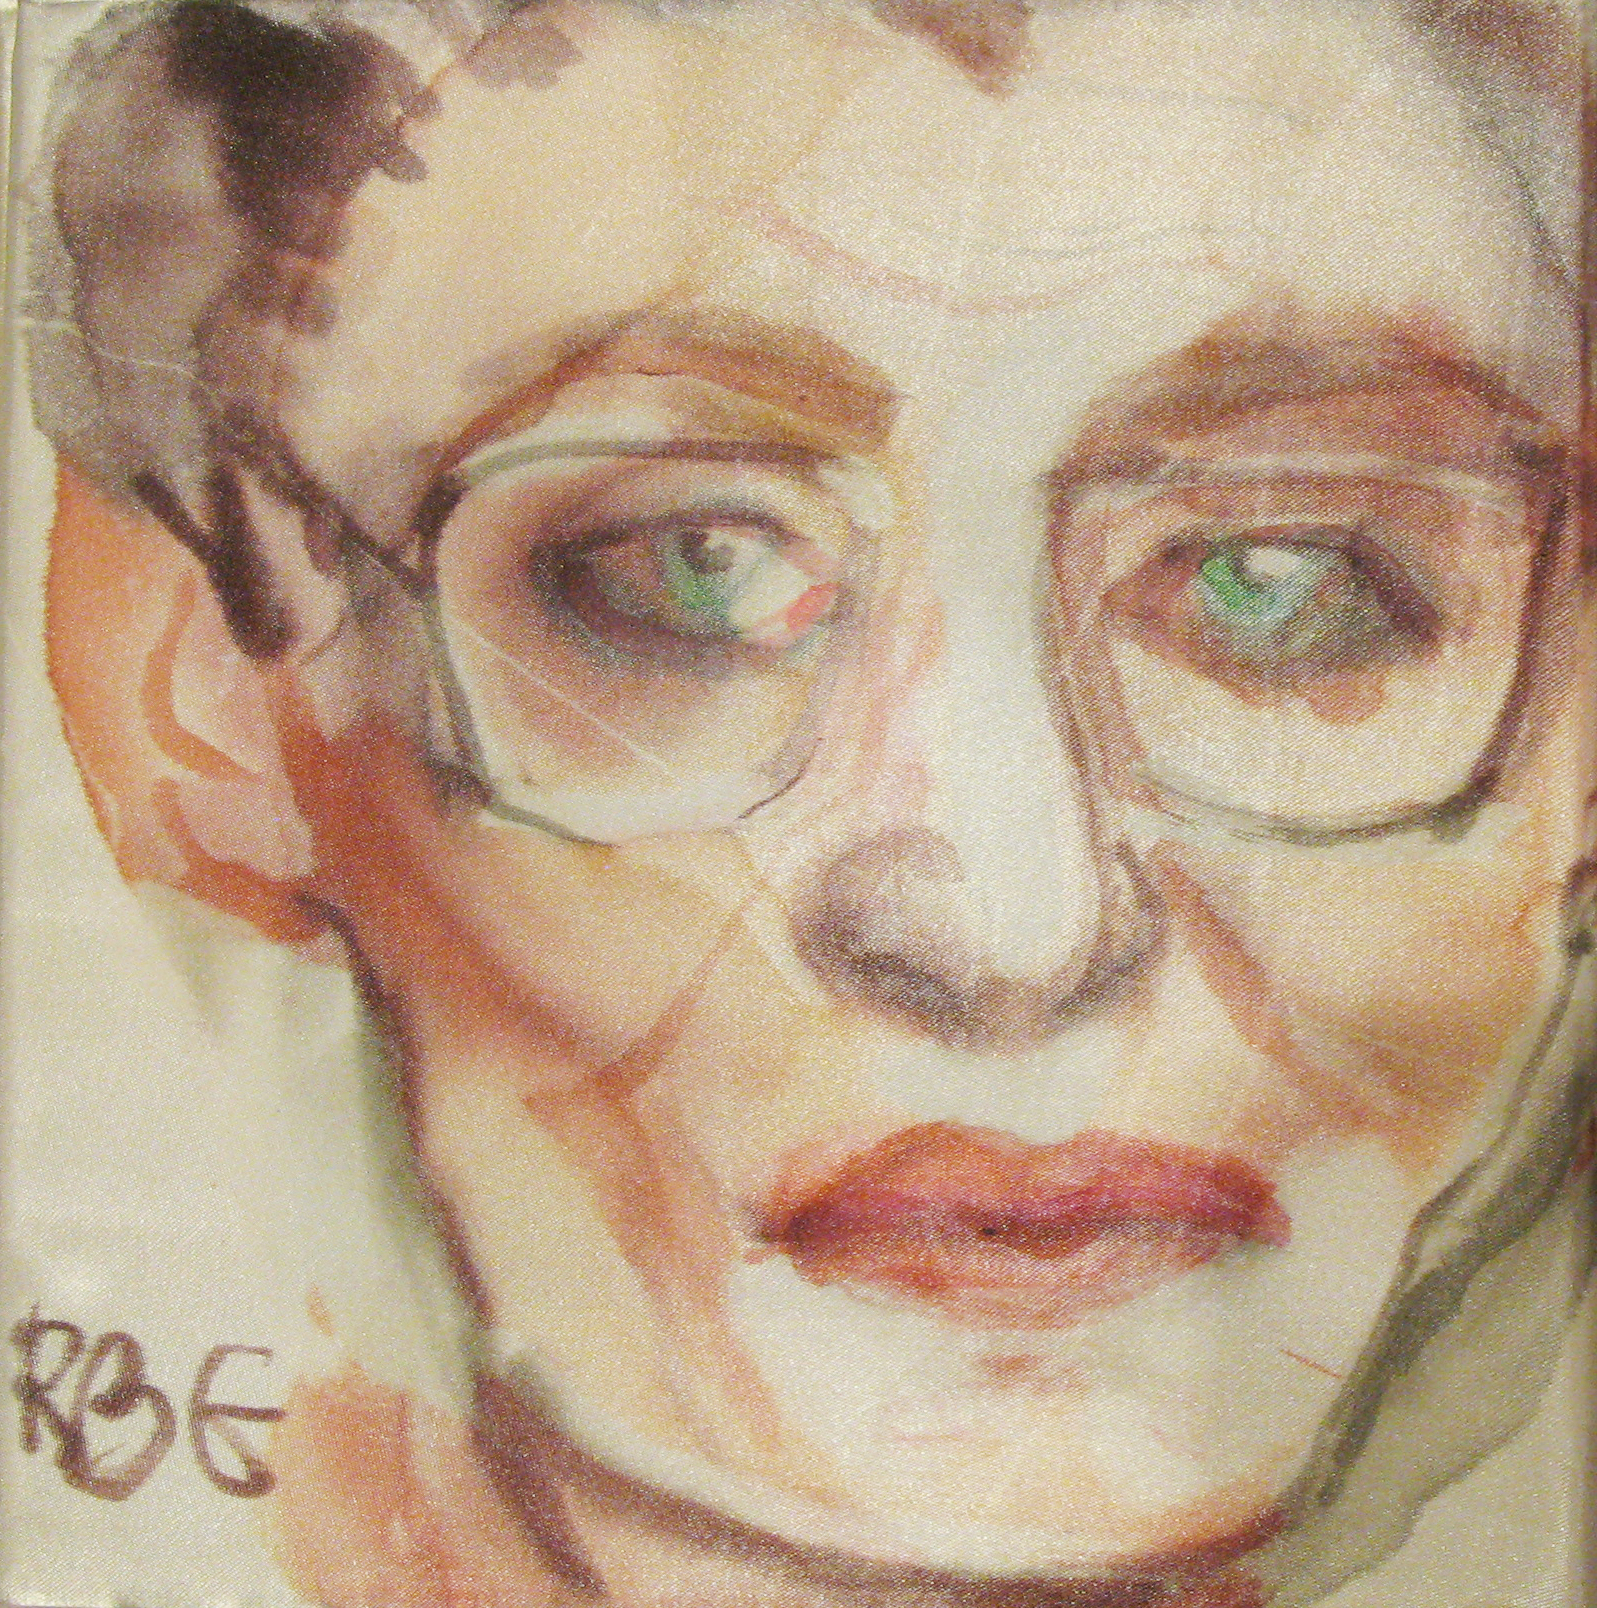 Justice Ginsburg, 20x20cm, watercolour on silk